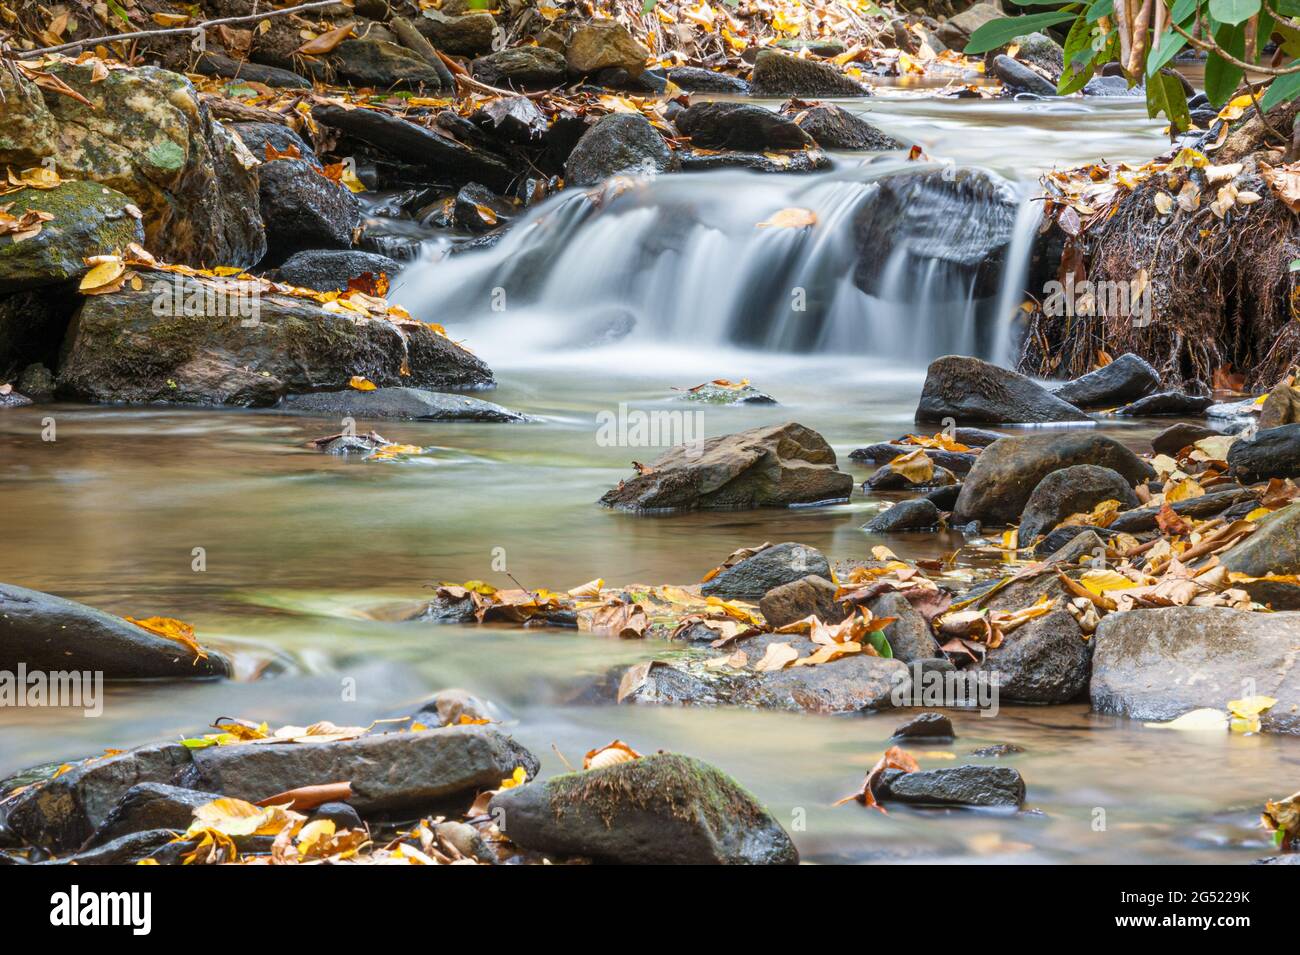 Autumn leaves cover rocks and creek bank along a soothing mountain stream near Asheville, North Carolina. (USA) Stock Photo